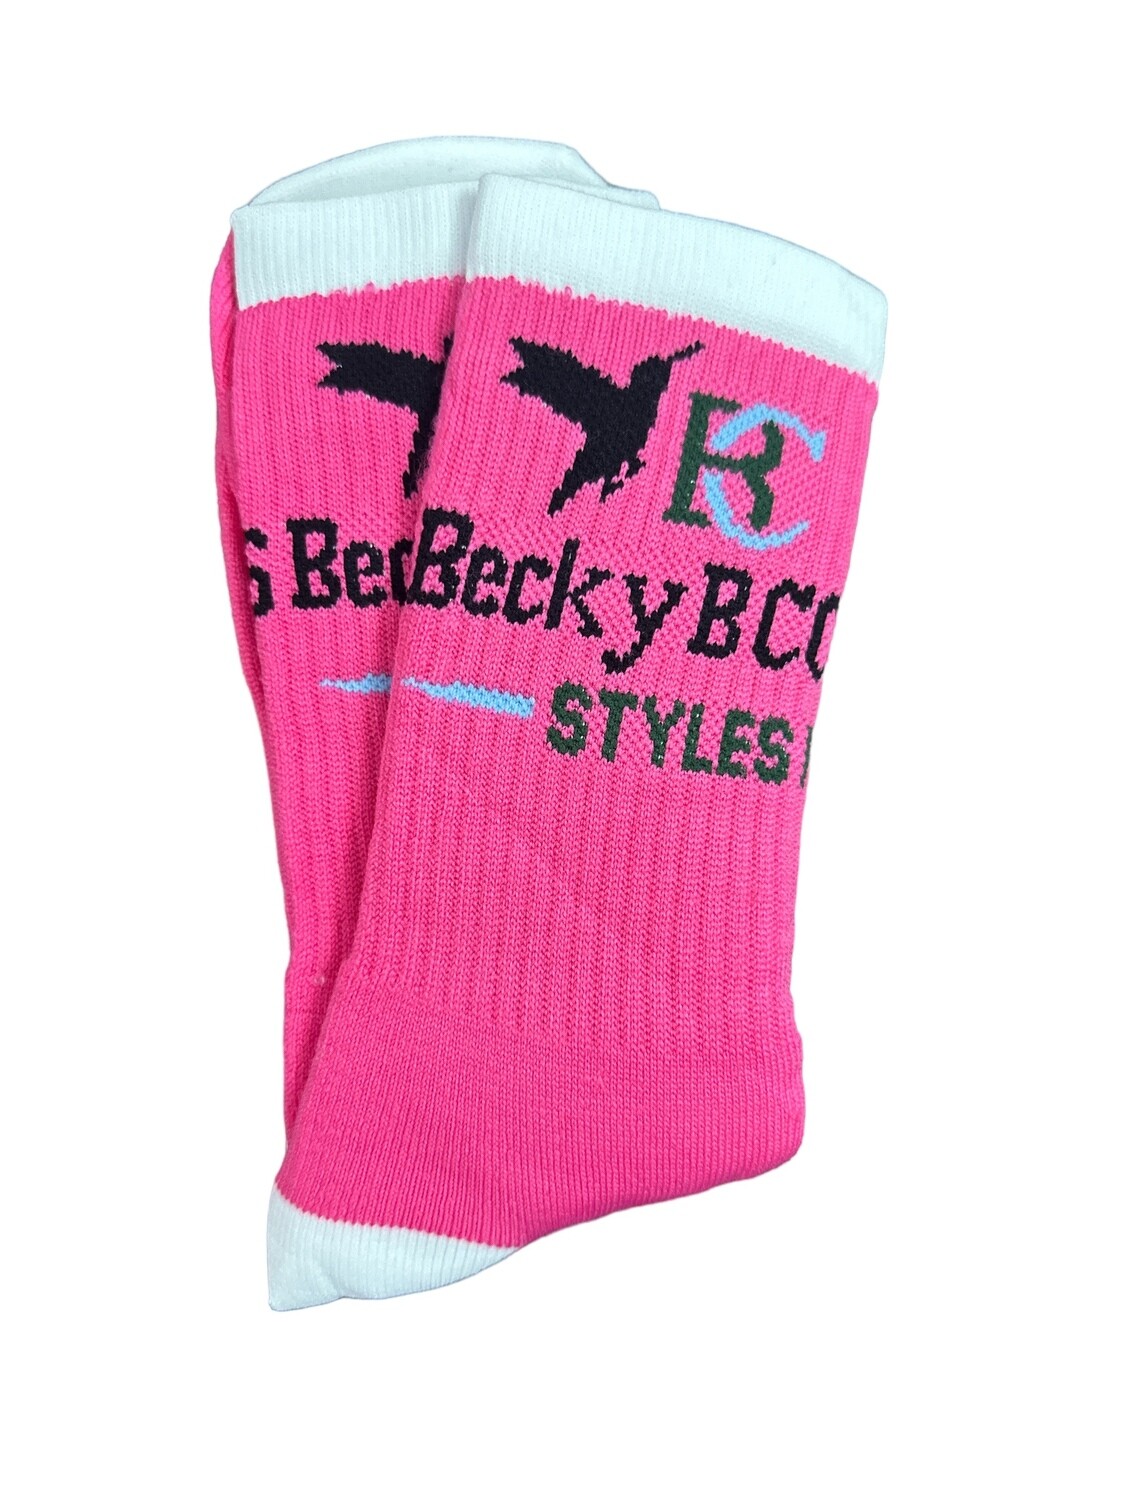 Longer Mid-leg LengthBecky B Logo or BC Stretch Socks for Women and Men. Buy More and Save.